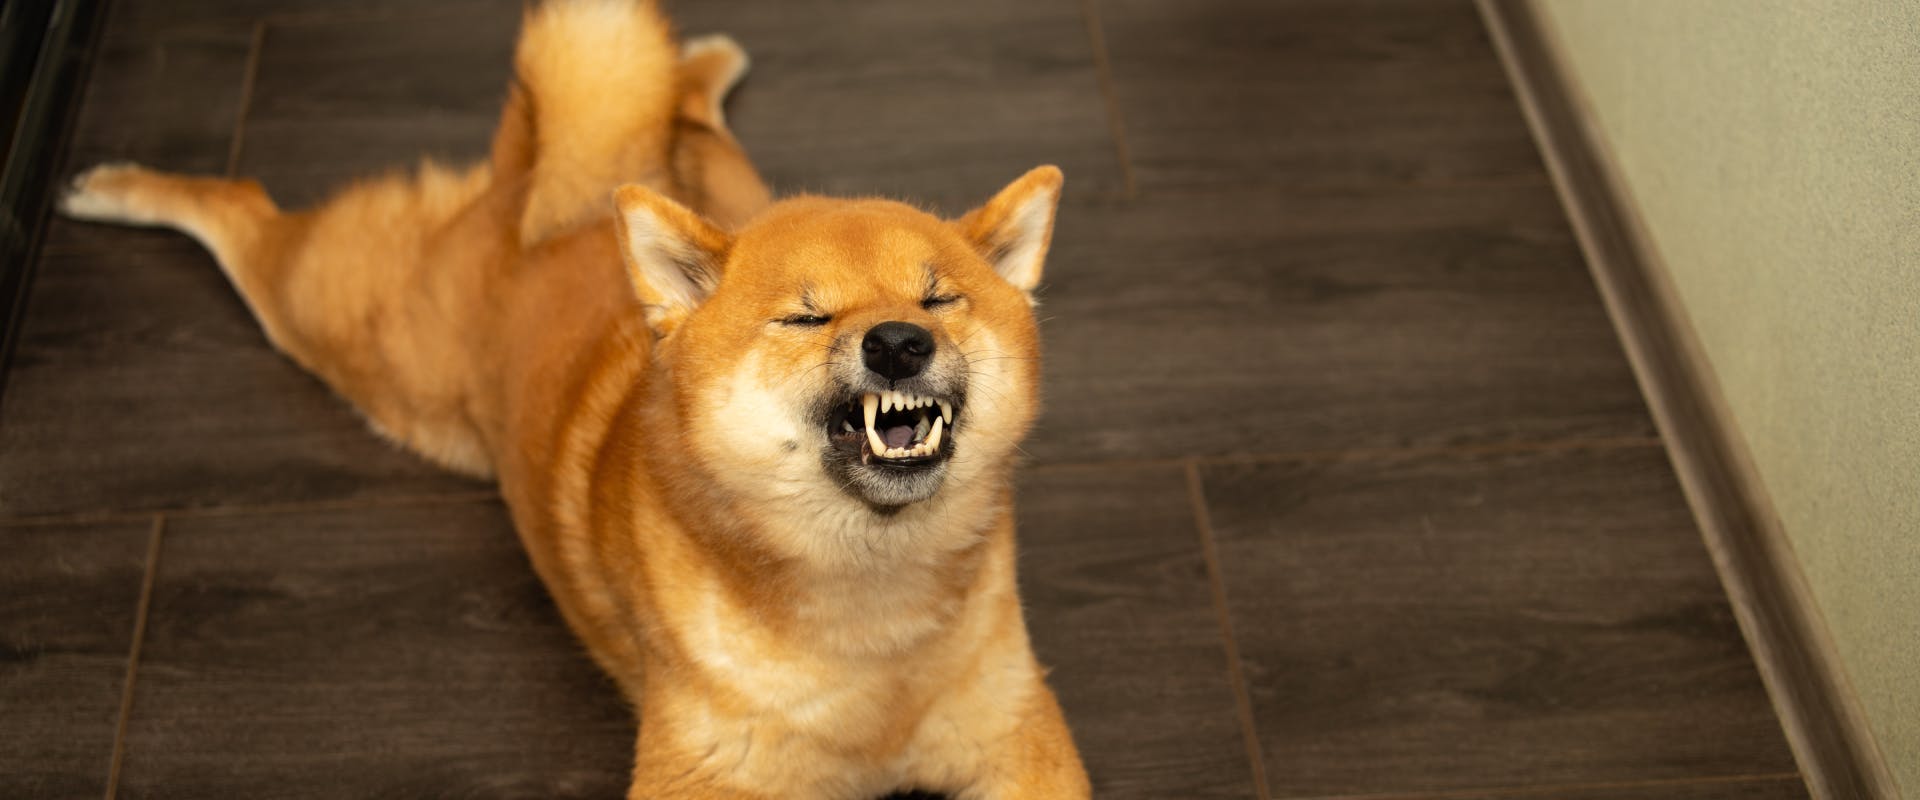 a shiba inu lying on a indoor wooden floor about to sneeze